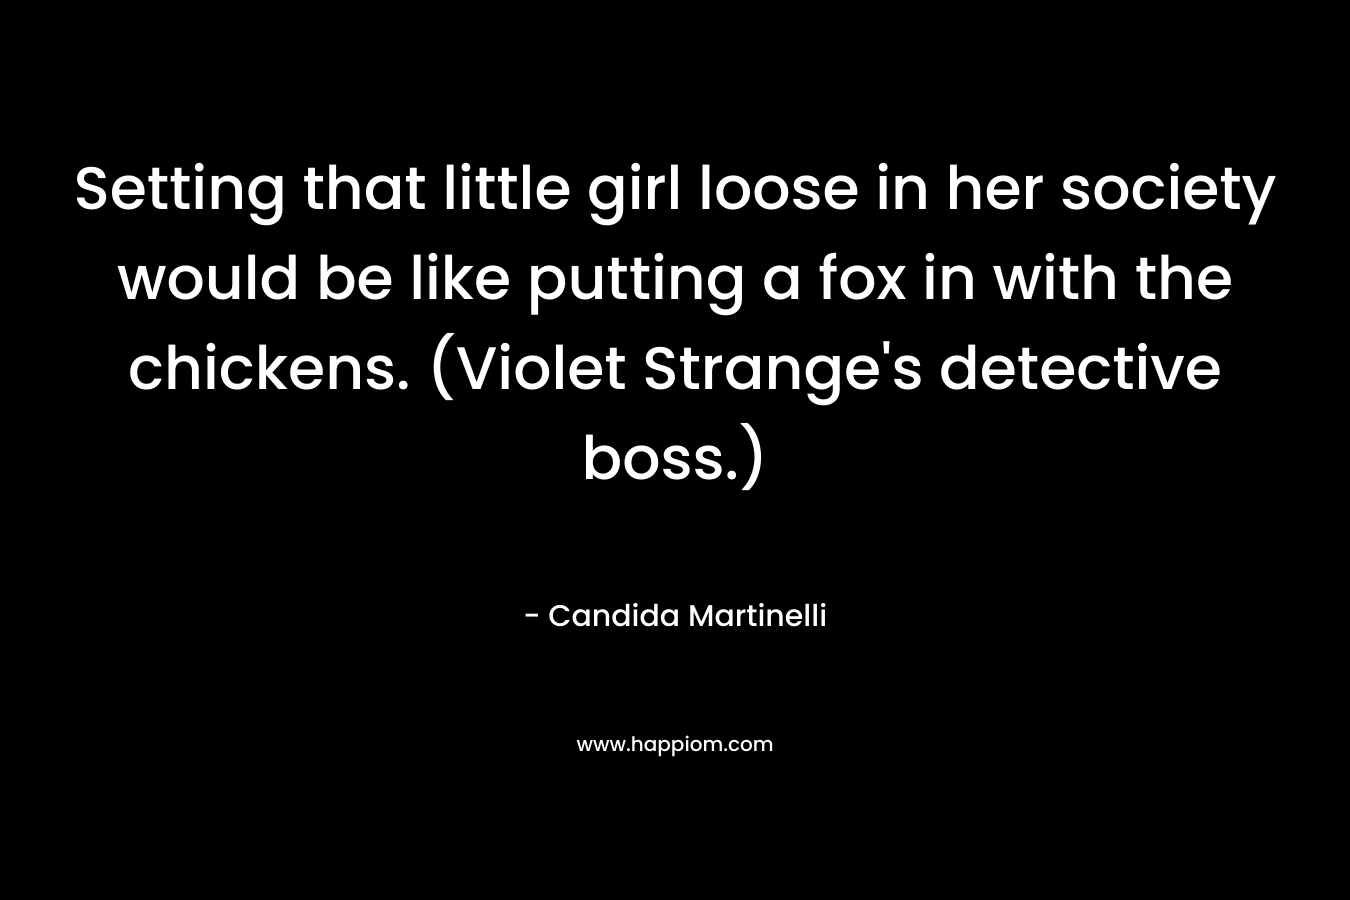 Setting that little girl loose in her society would be like putting a fox in with the chickens. (Violet Strange’s detective boss.) – Candida Martinelli